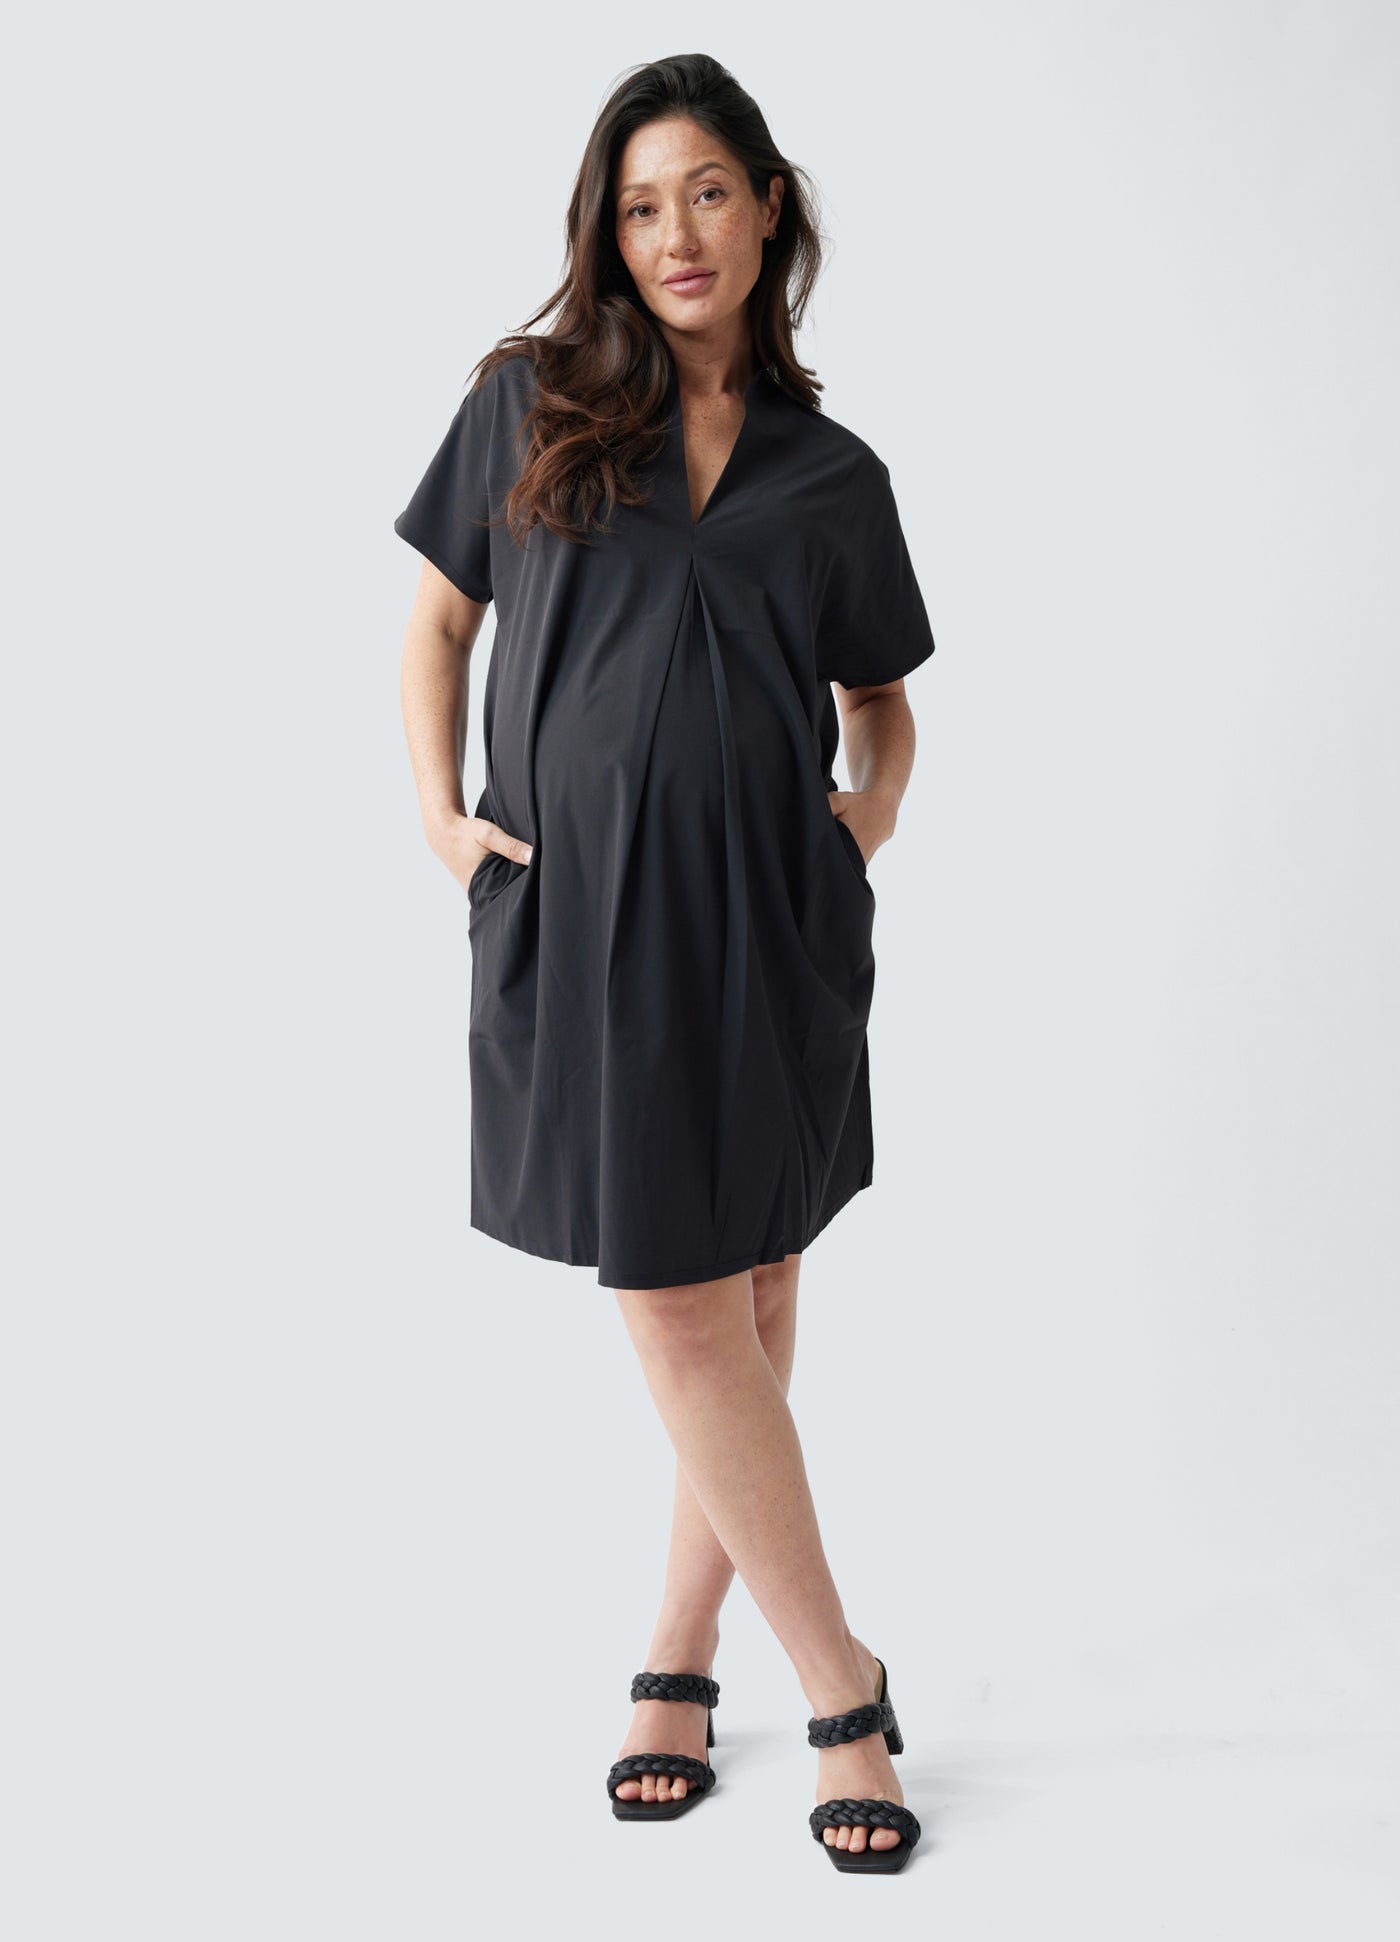 Aylya is 5’6”, 30 weeks pregnant, and wearing size S||Black